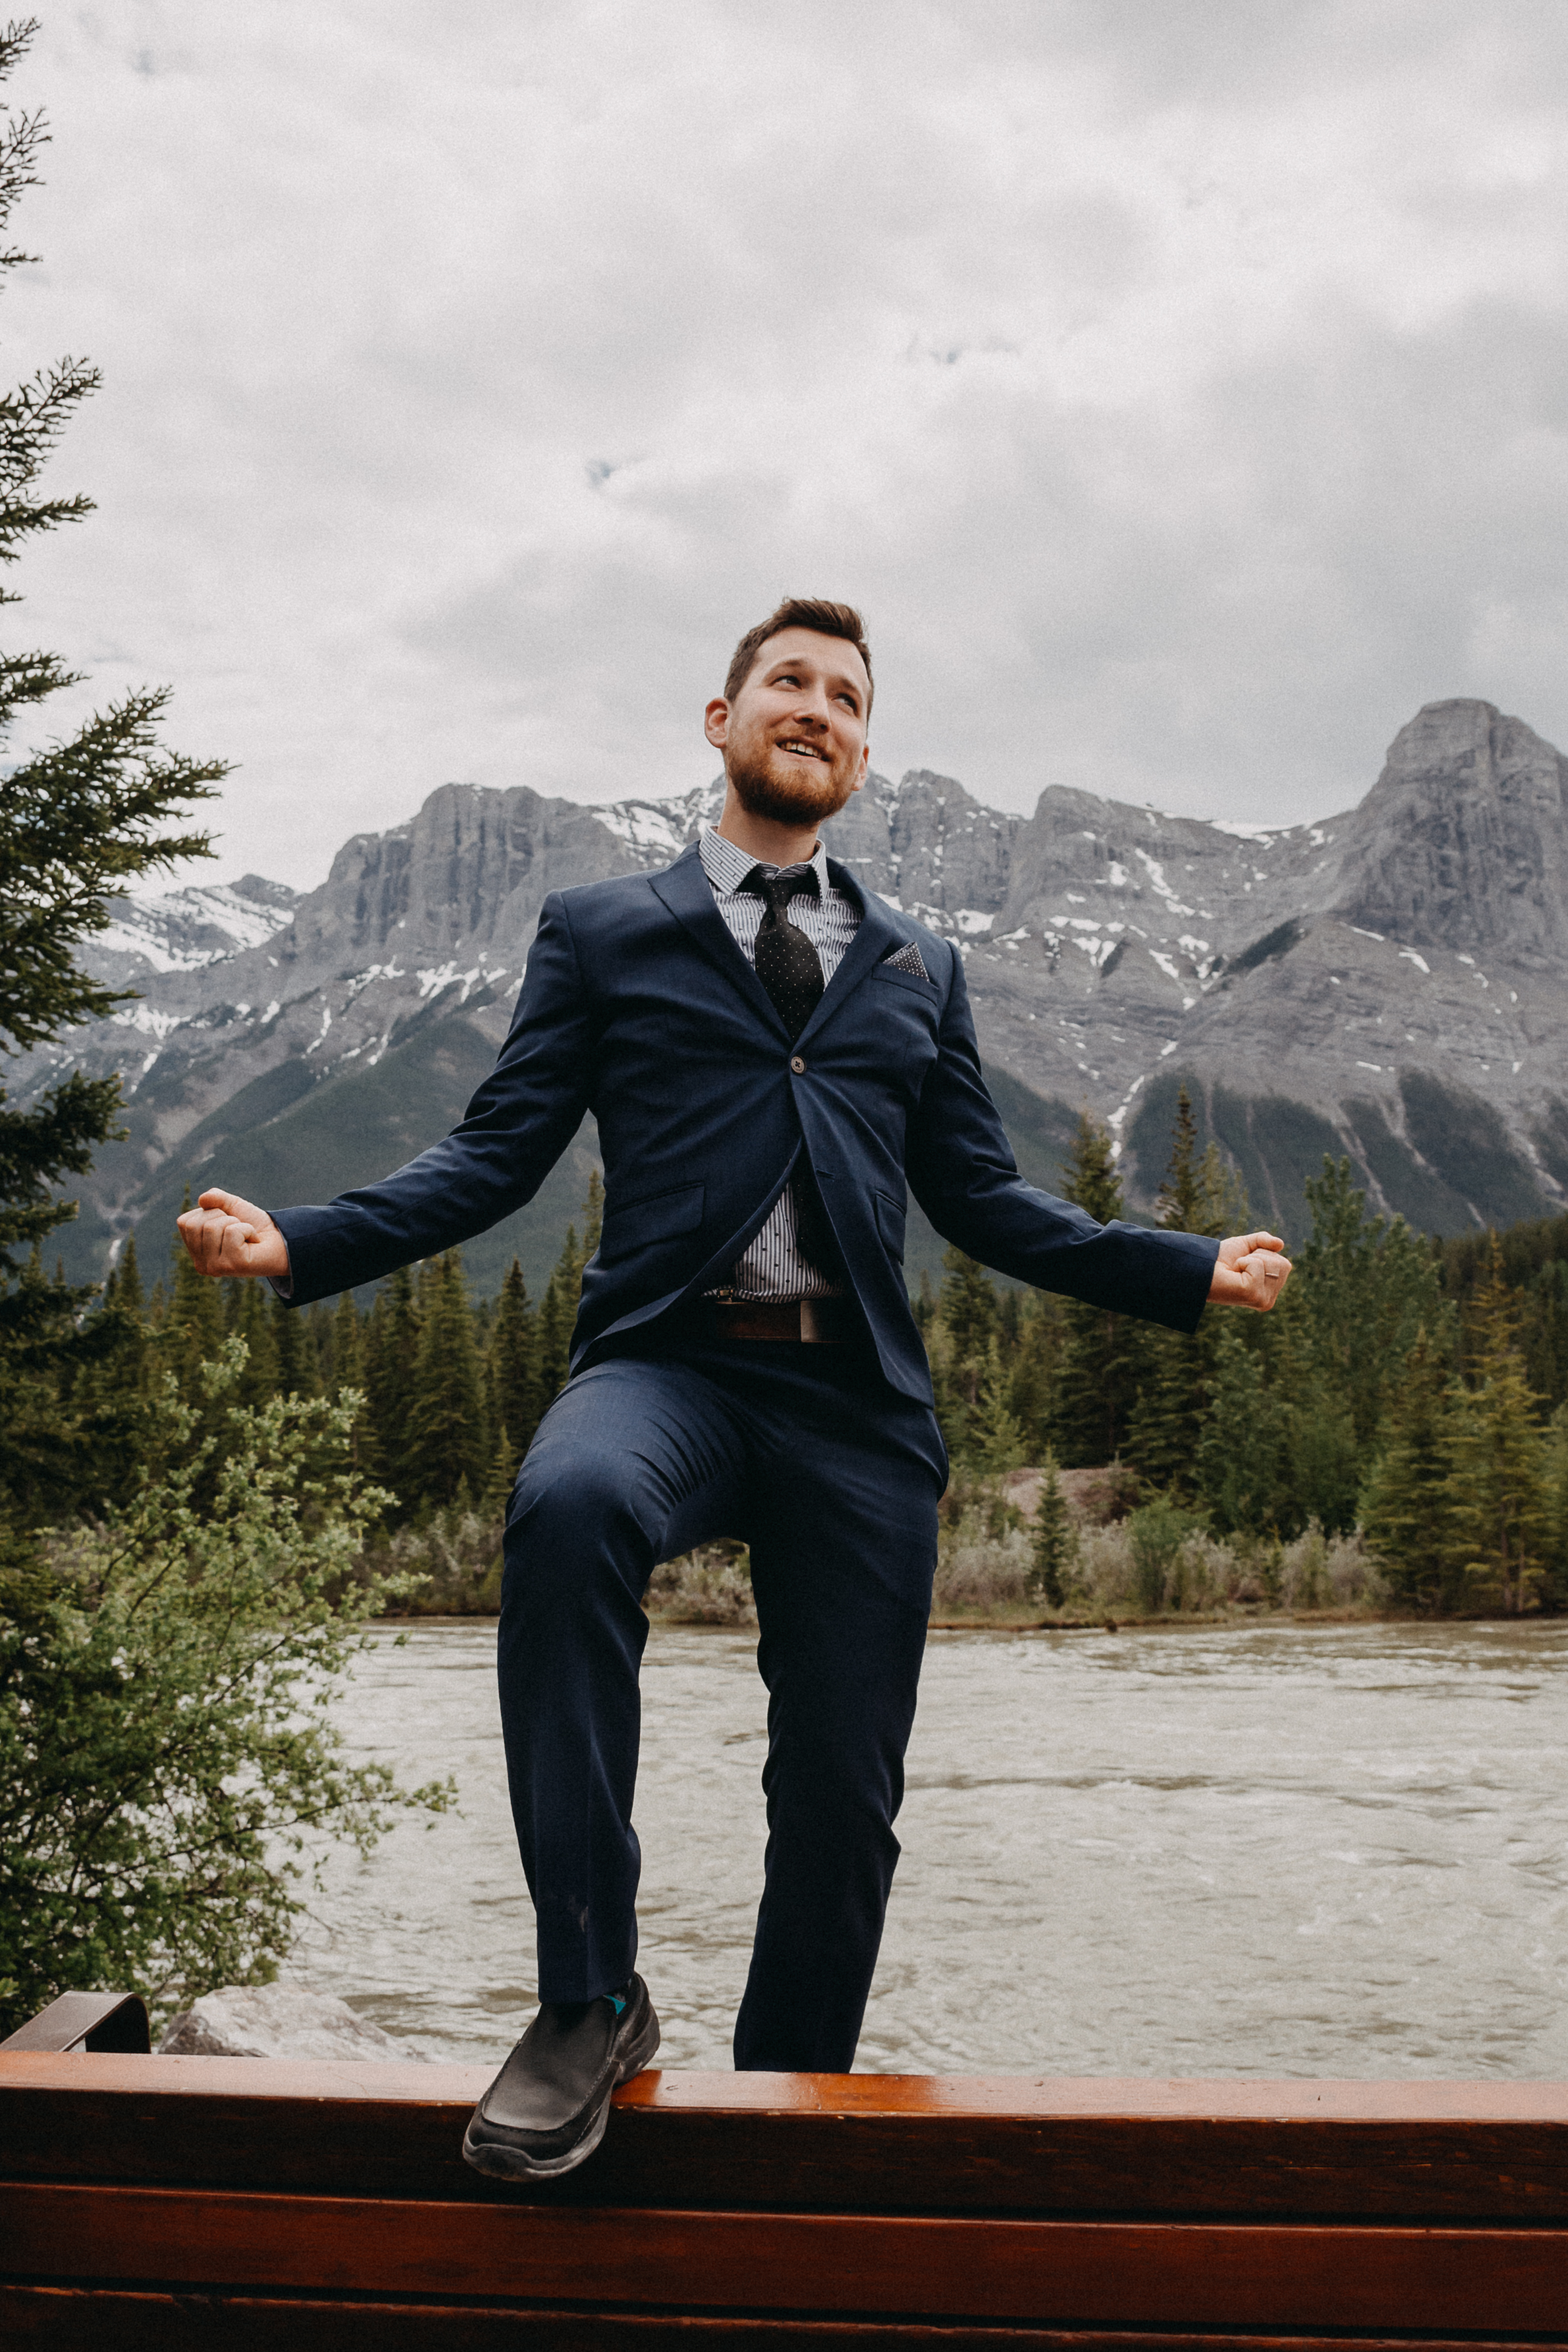 The groom standing on top of a bench in front of the rocky mountains, expressing joy